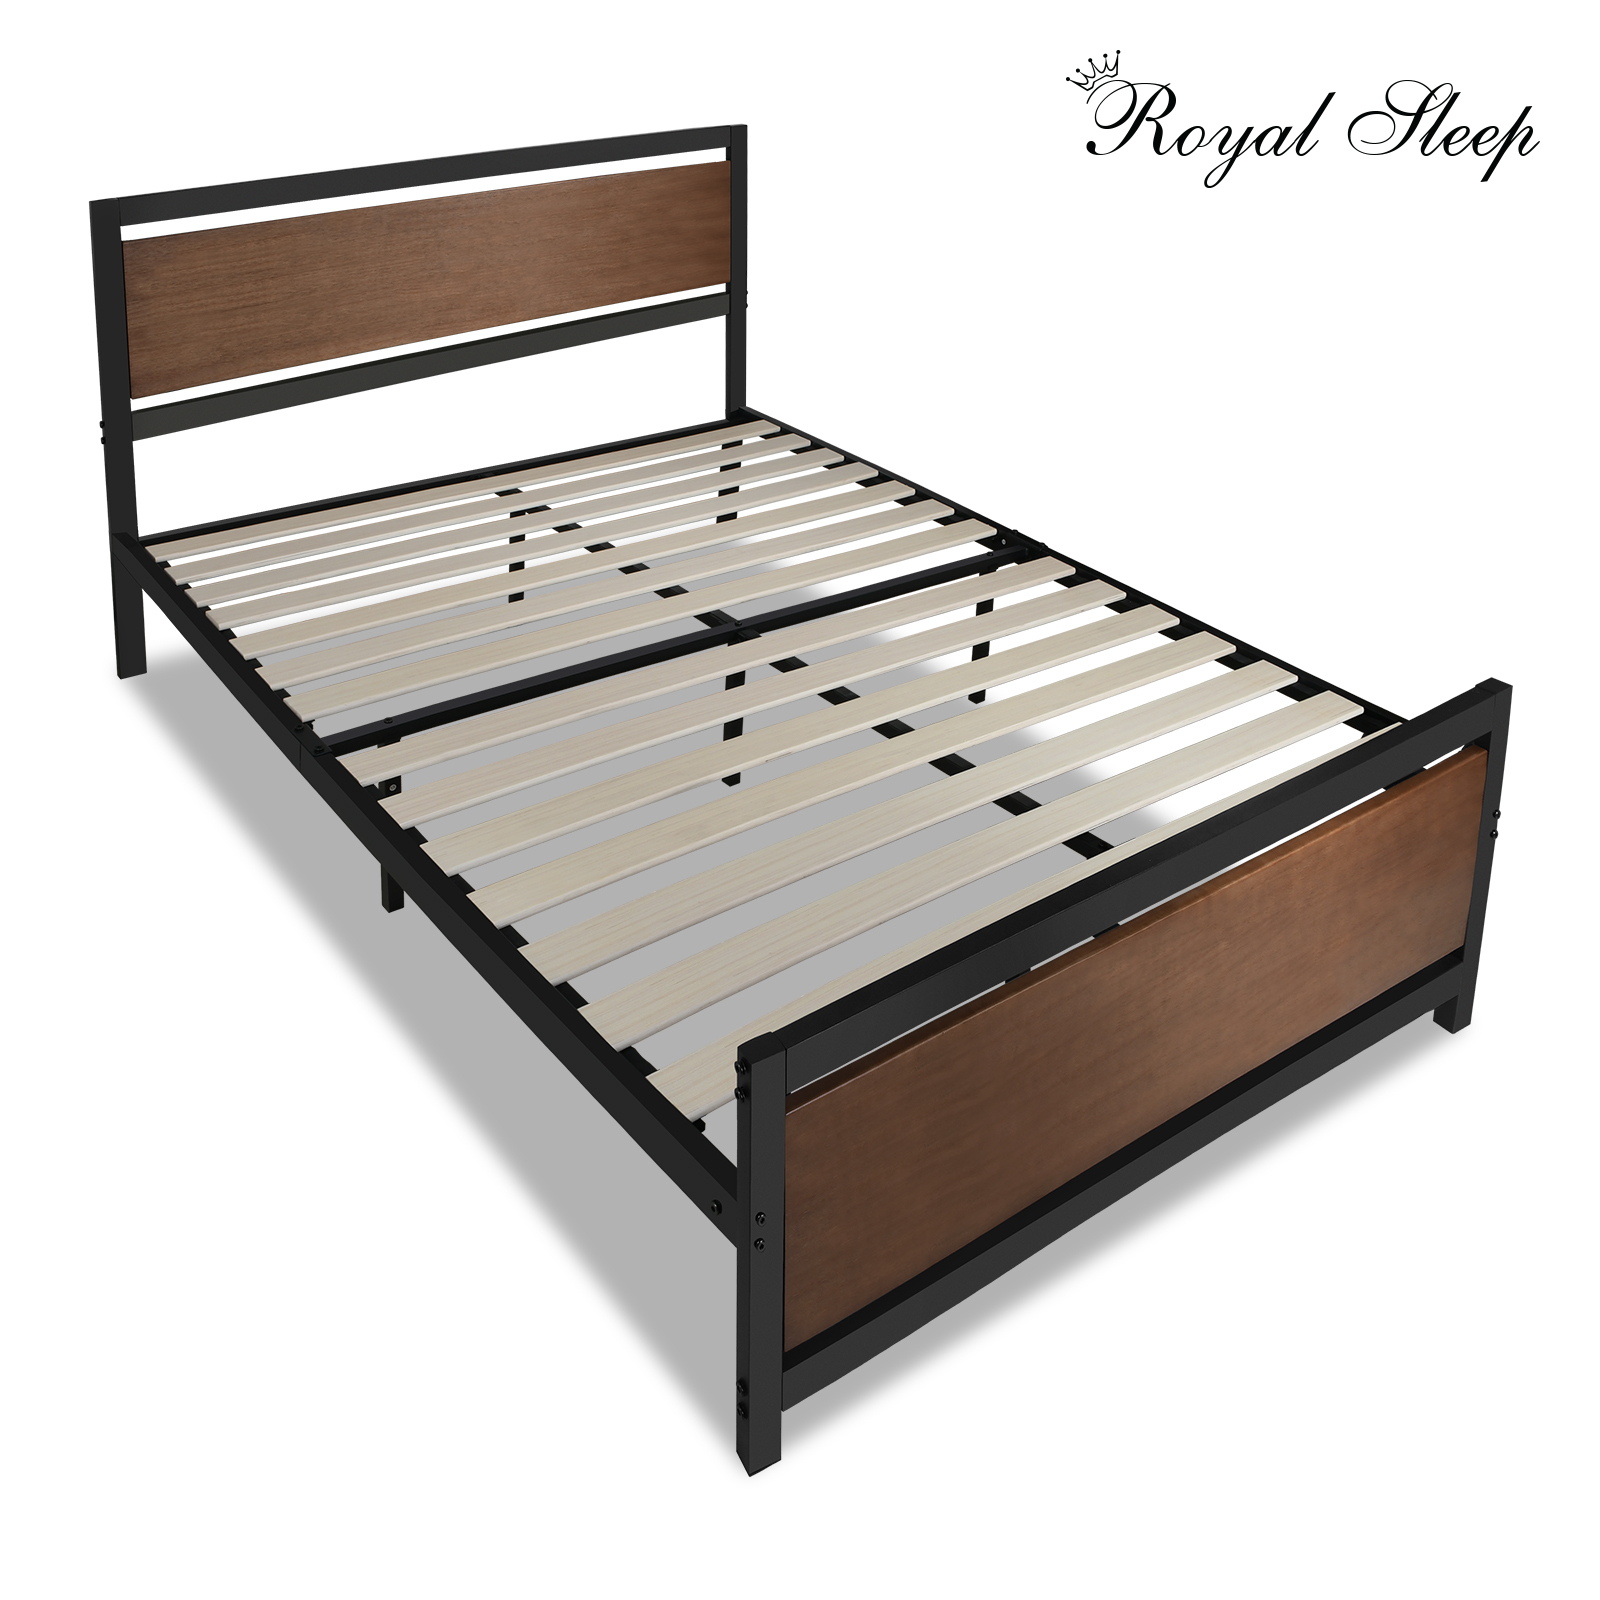 Royal Sleep Double Bed Frame Solid Wooden Pine with Iron Metal Frame